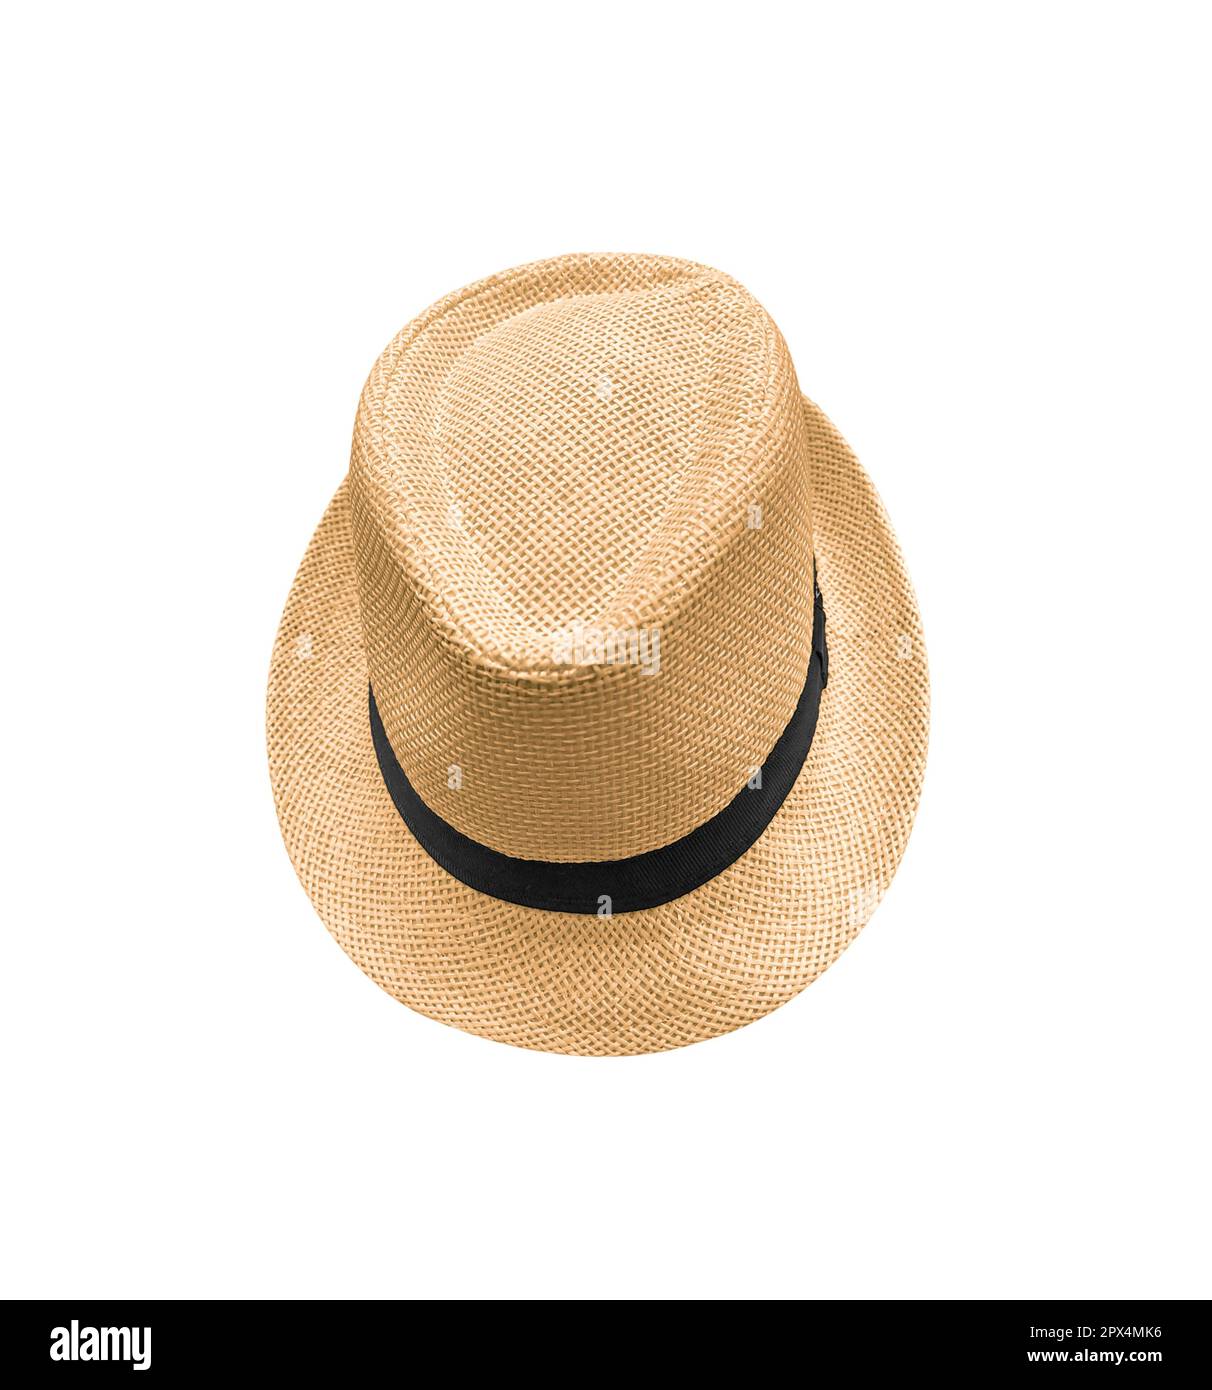 https://c8.alamy.com/comp/2PX4MK6/vintage-straw-hat-fasion-for-man-isolated-on-white-background-2PX4MK6.jpg